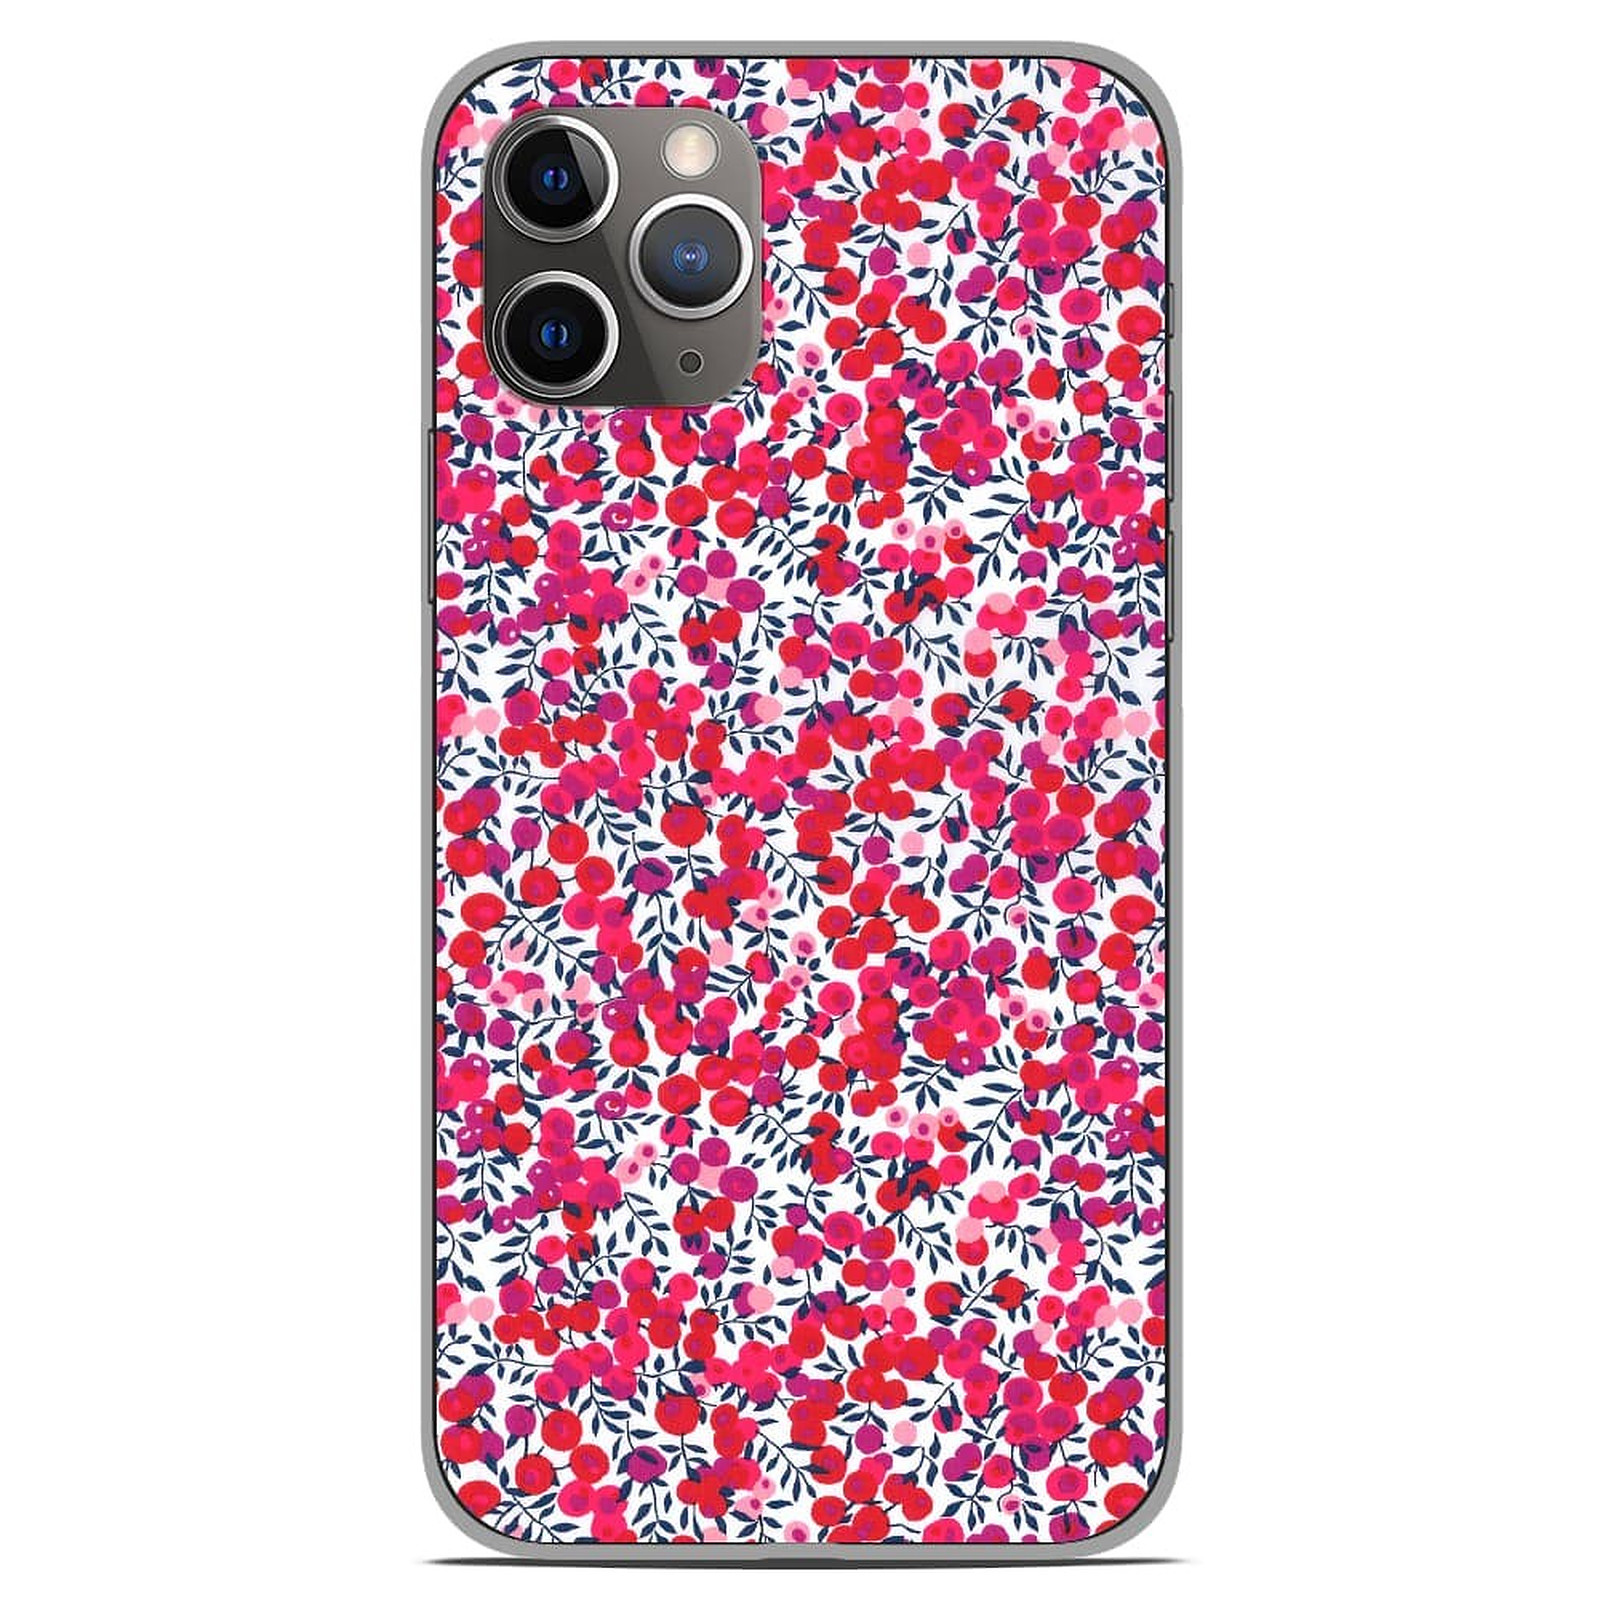 1001 Coques Coque silicone gel Apple iPhone 11 Pro motif Liberty Wiltshire Rouge - Coque telephone 1001Coques